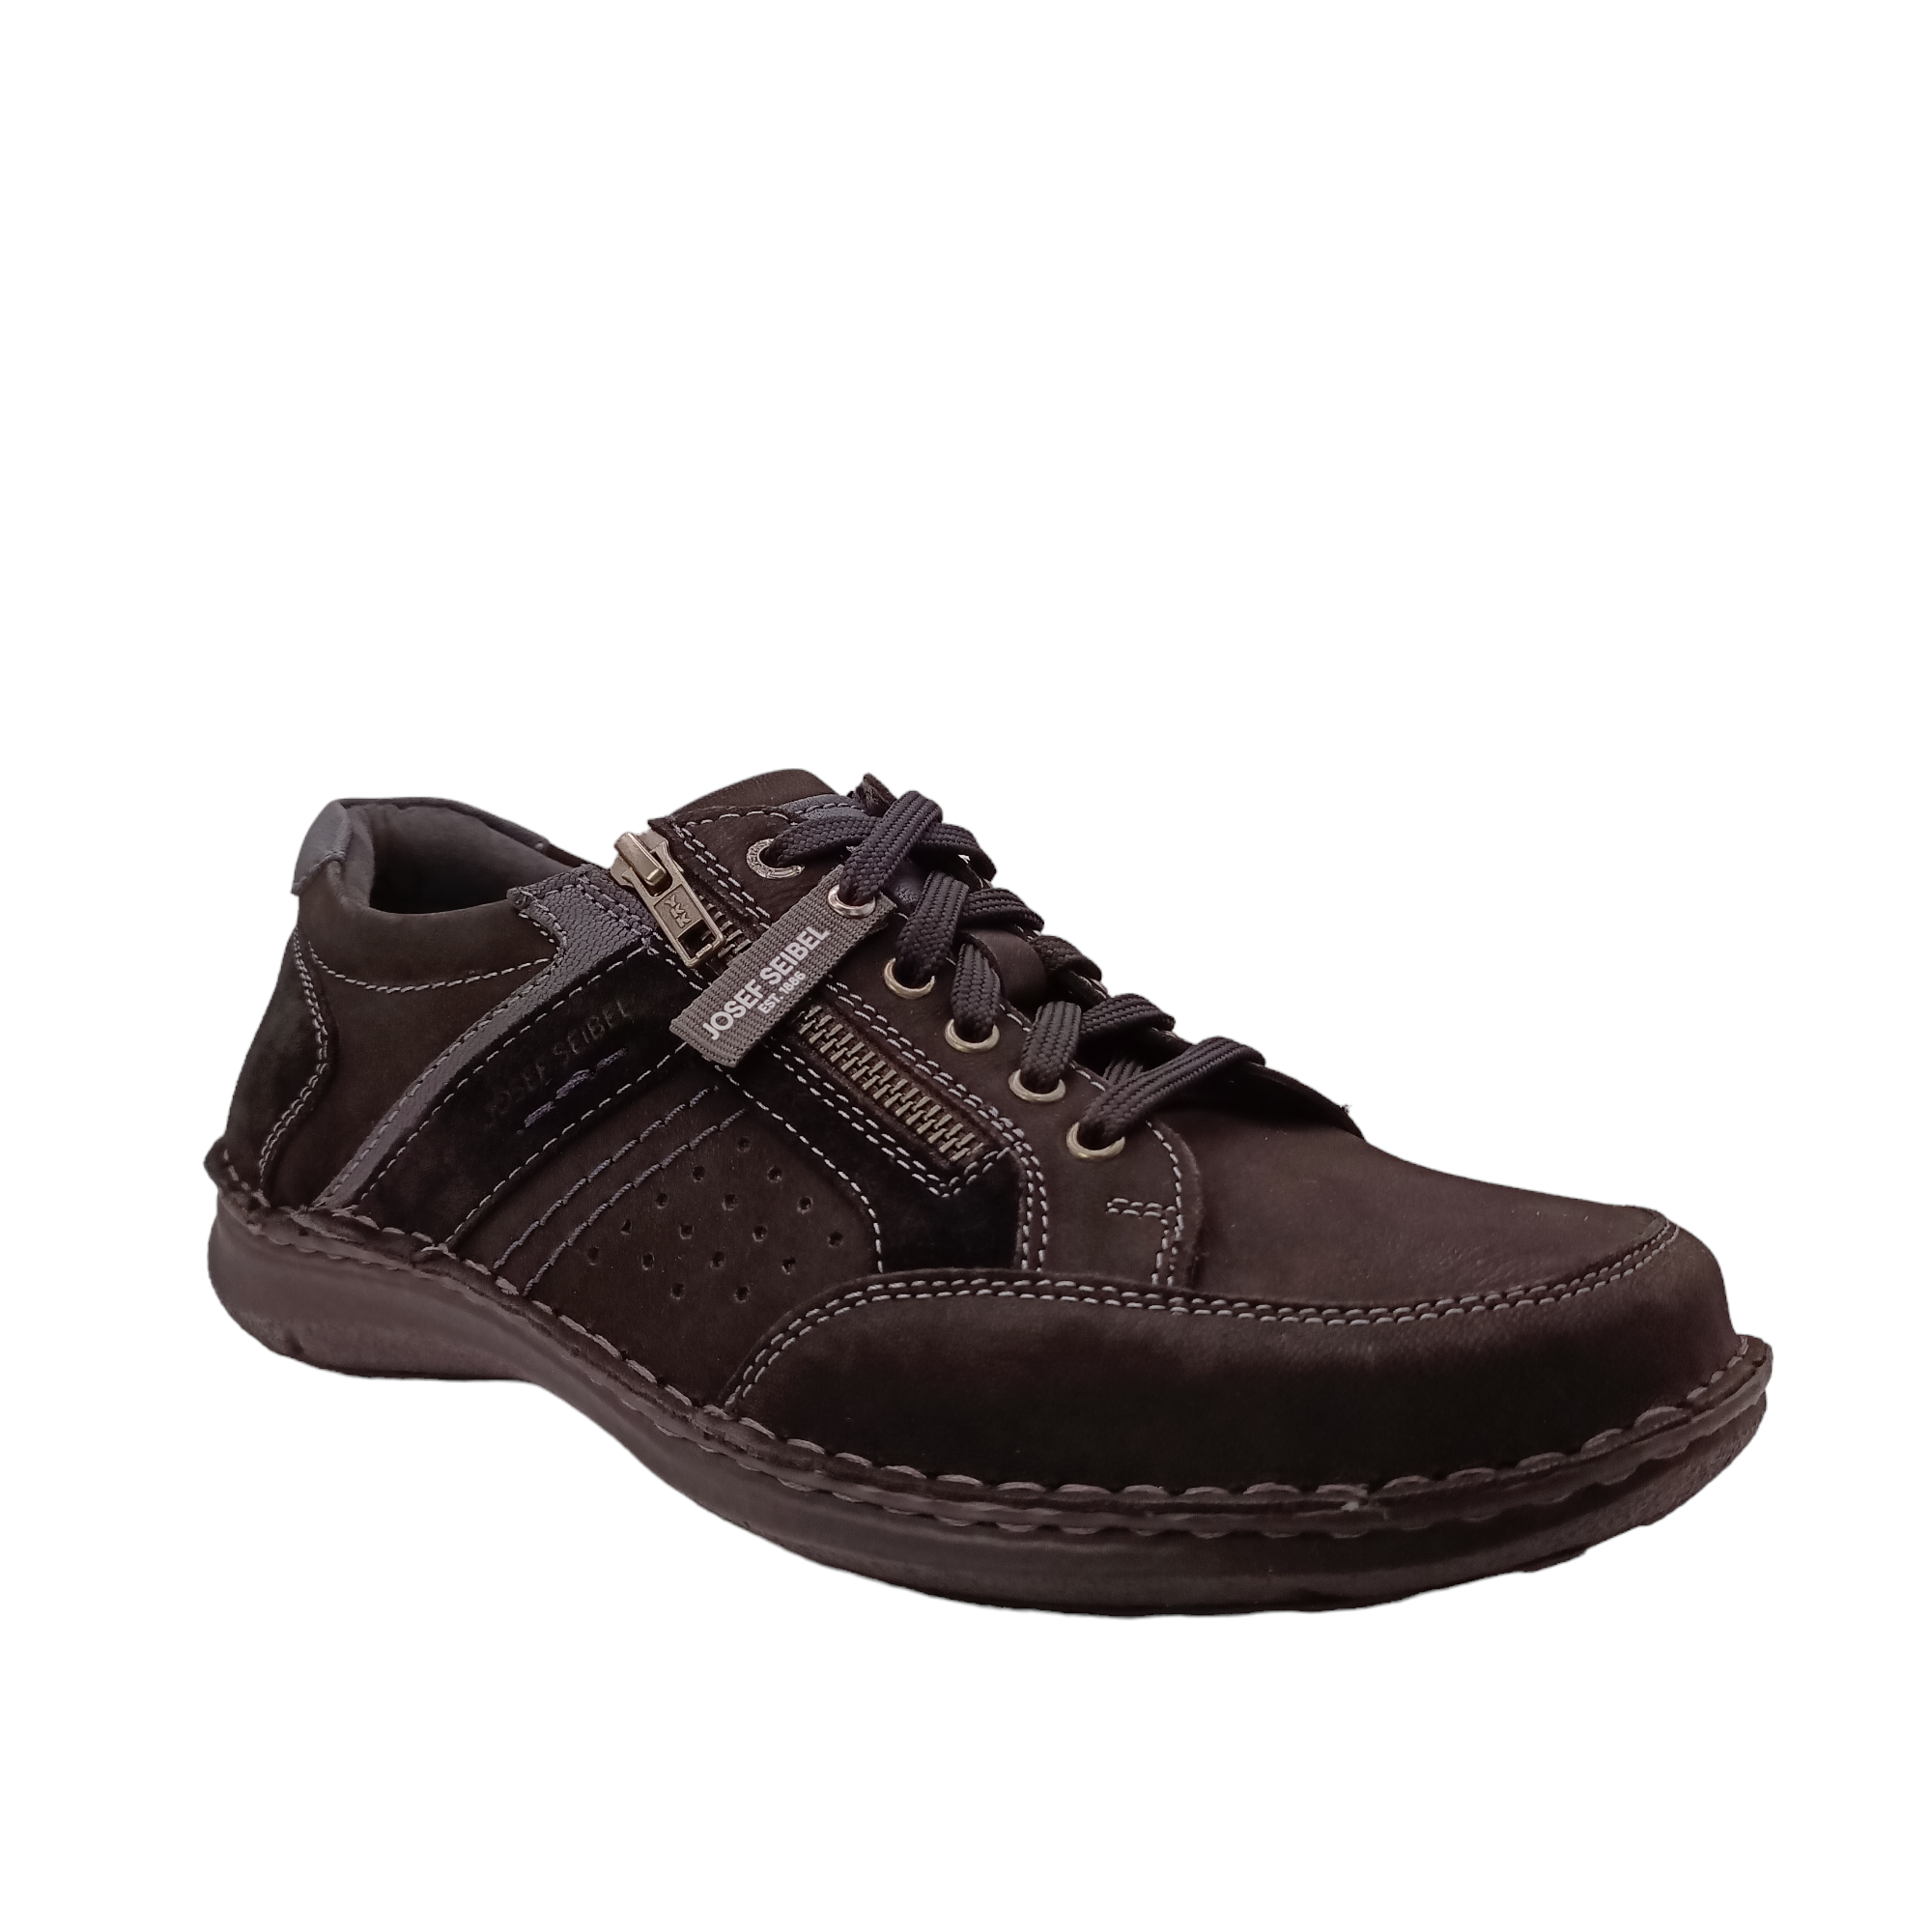 Shop Anvers 87 Josef Seibel - with shoe&amp;me - from Josef Seibel - Shoes - Mens, Shoe, Winter - [collection]